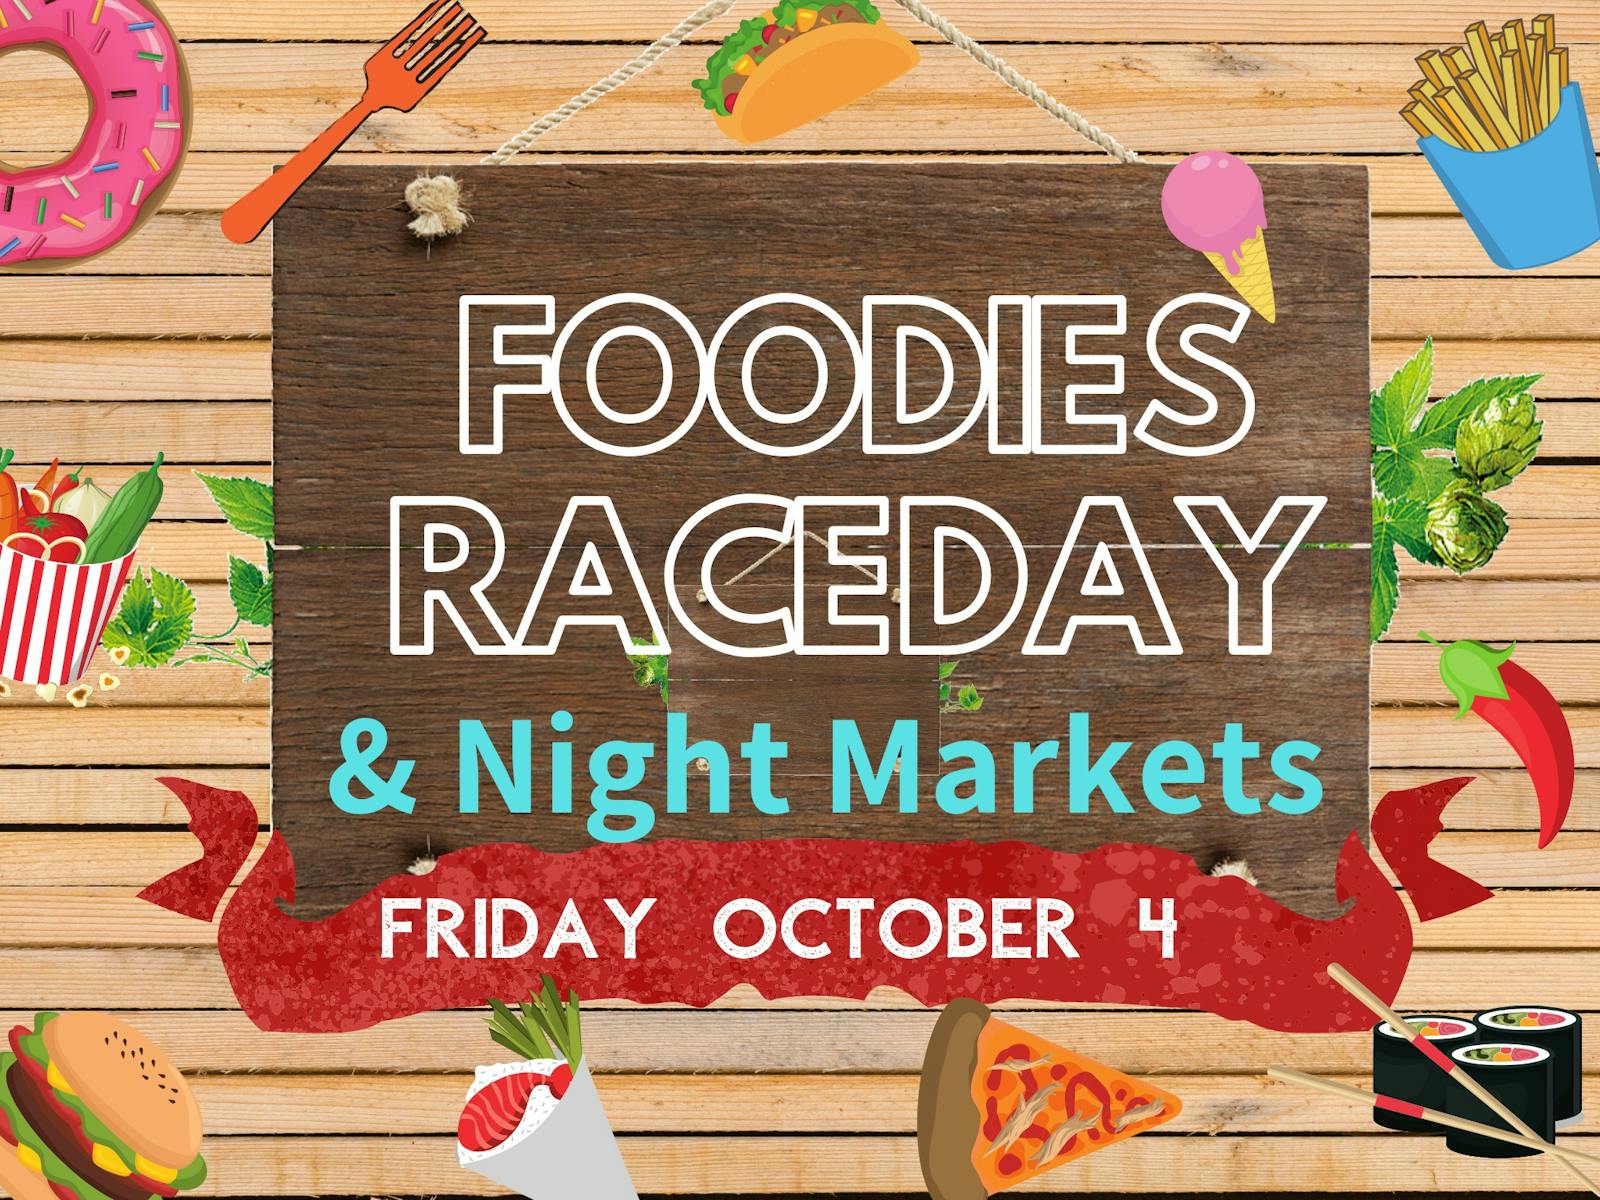 Image for Foodies Race Day and Night Markets